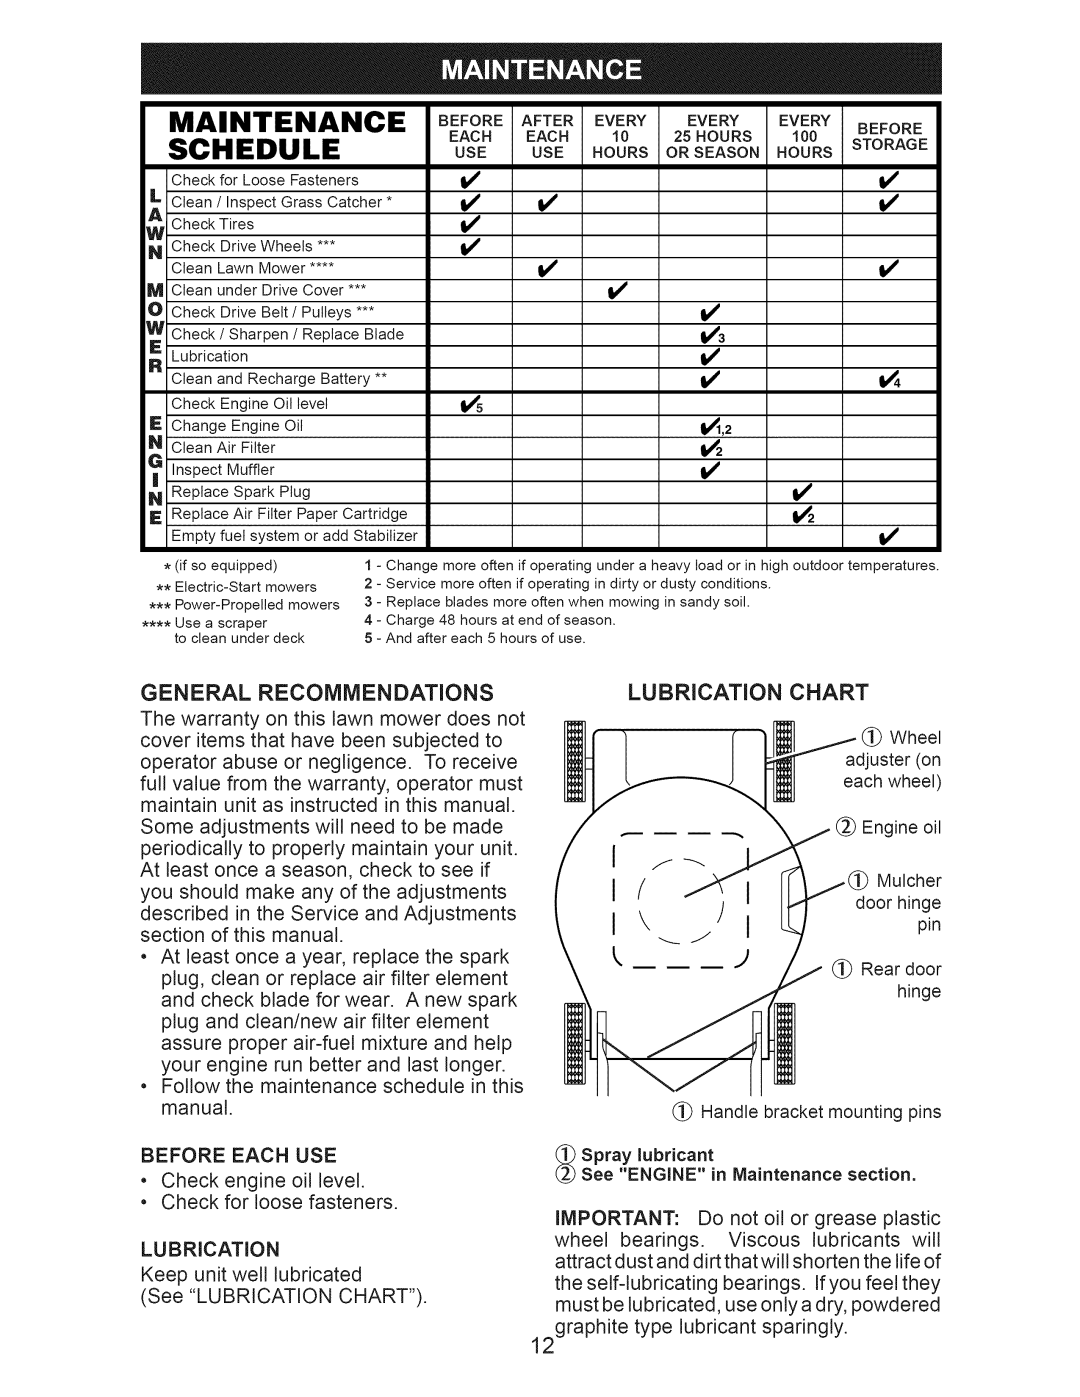 Craftsman 917.376405 owner manual Maintenance, Schedule, Use Hours 